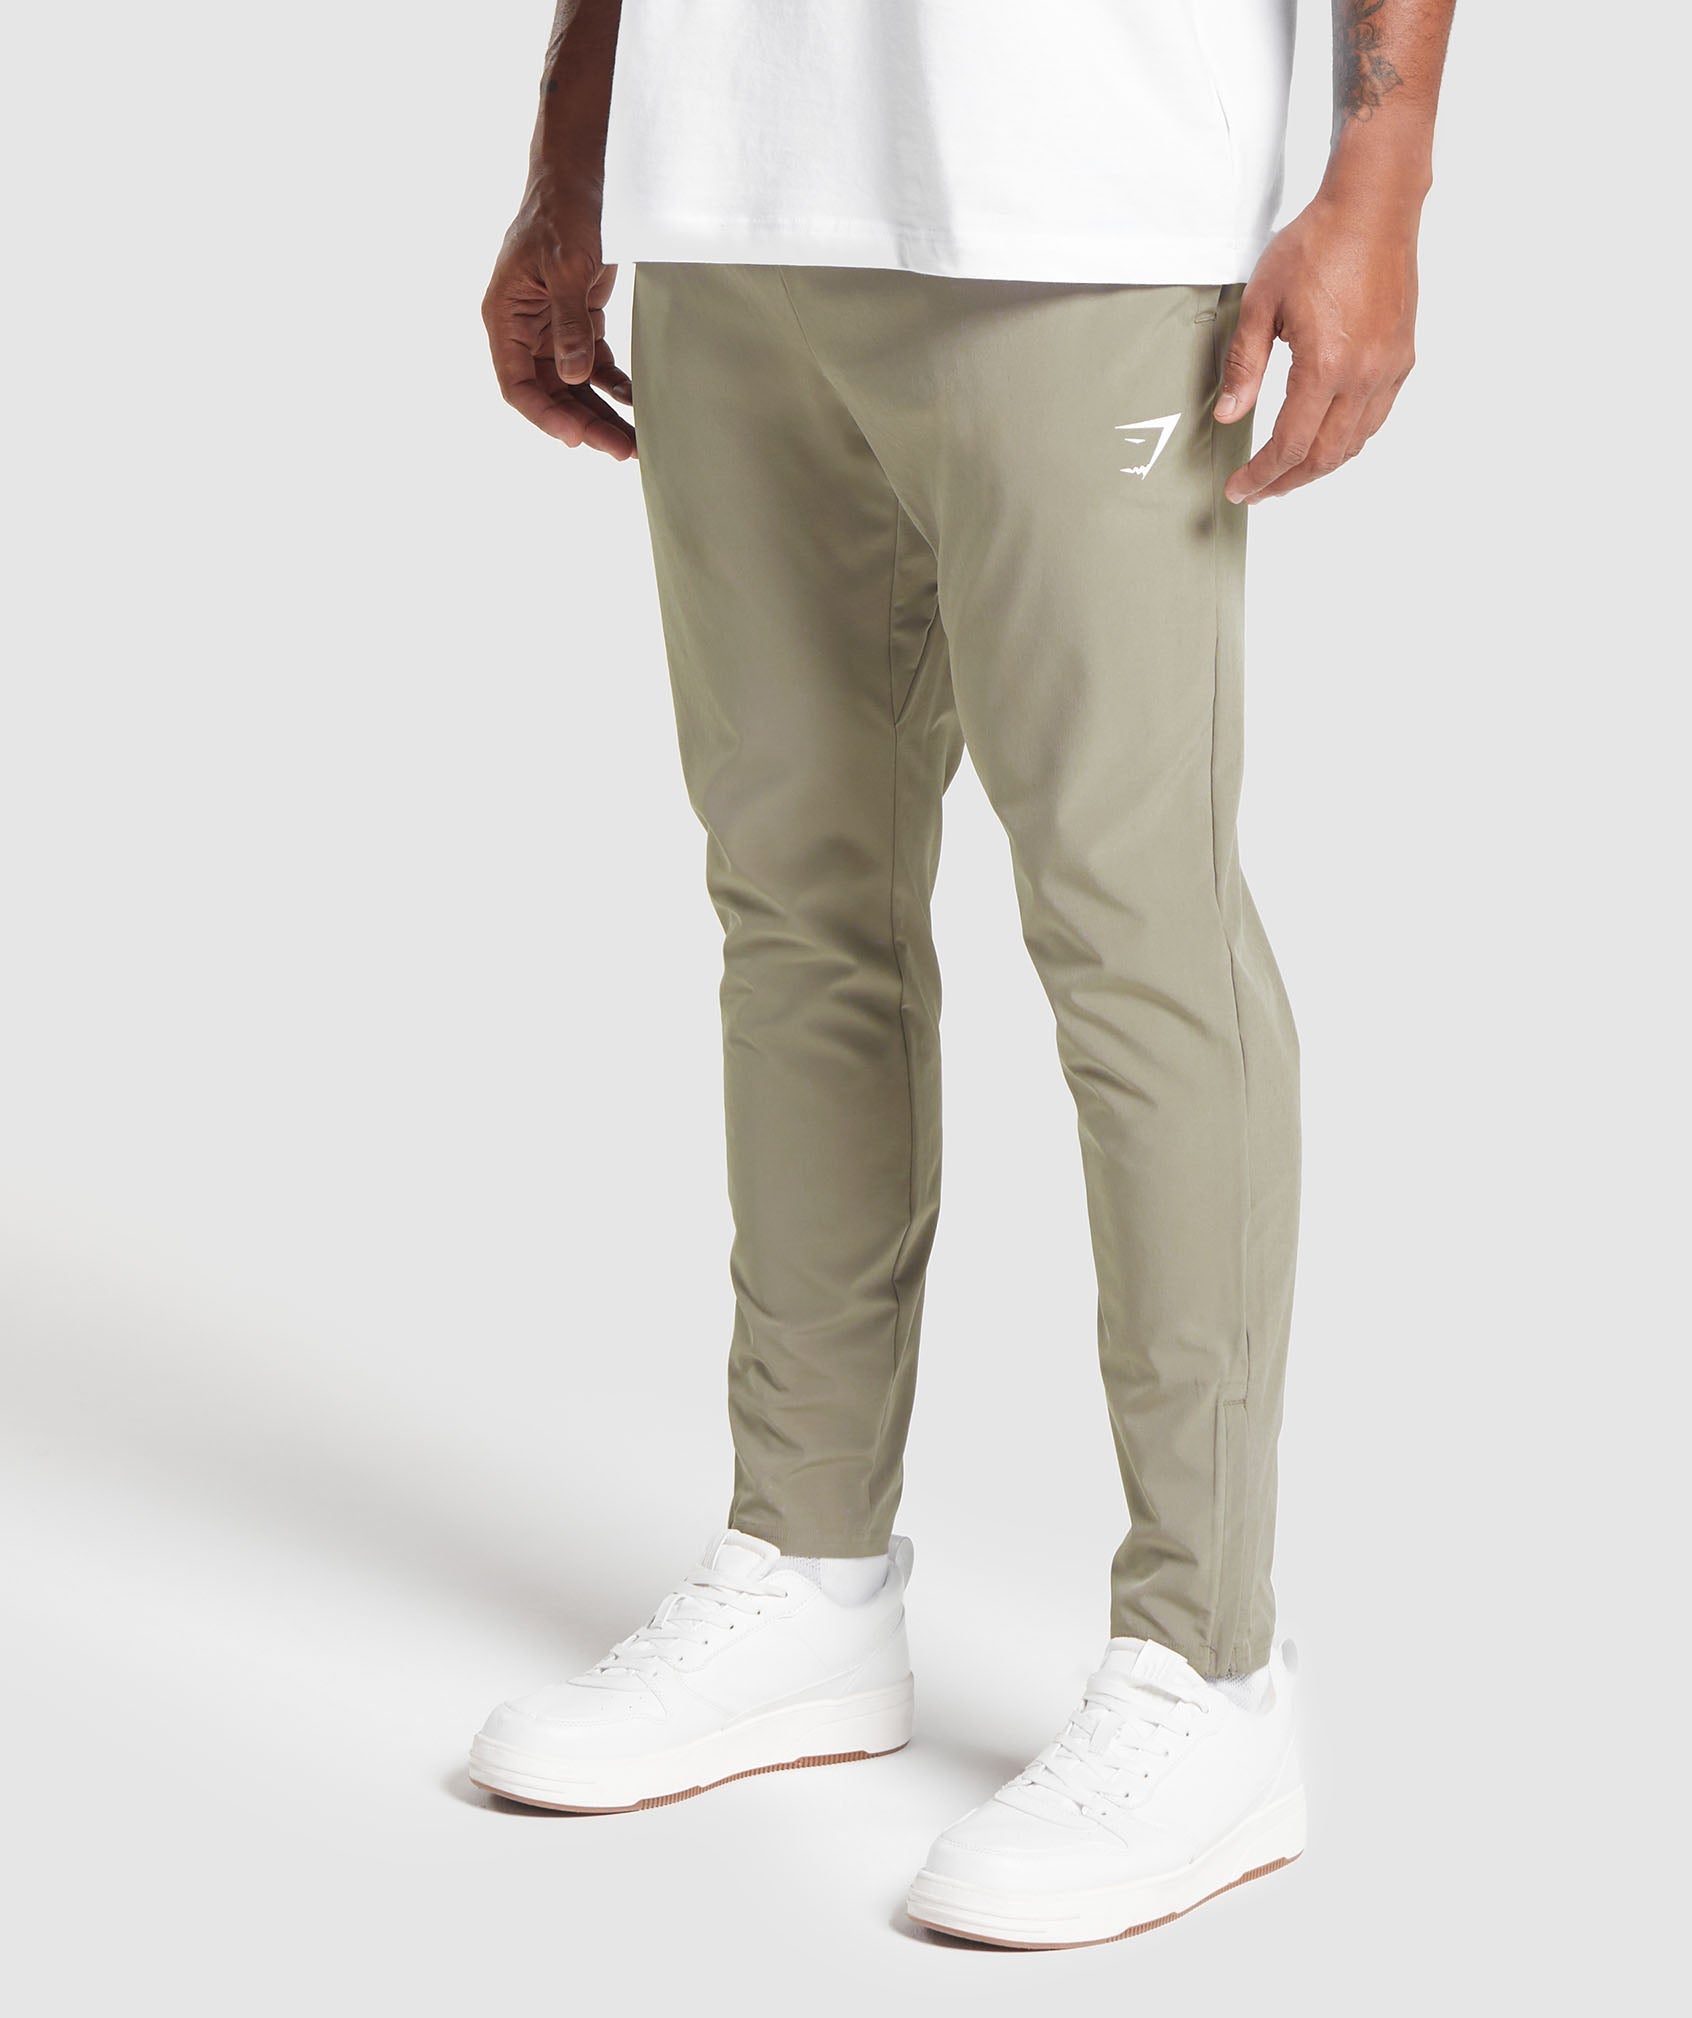 Arrival Woven Joggers in Linen Brown - view 3